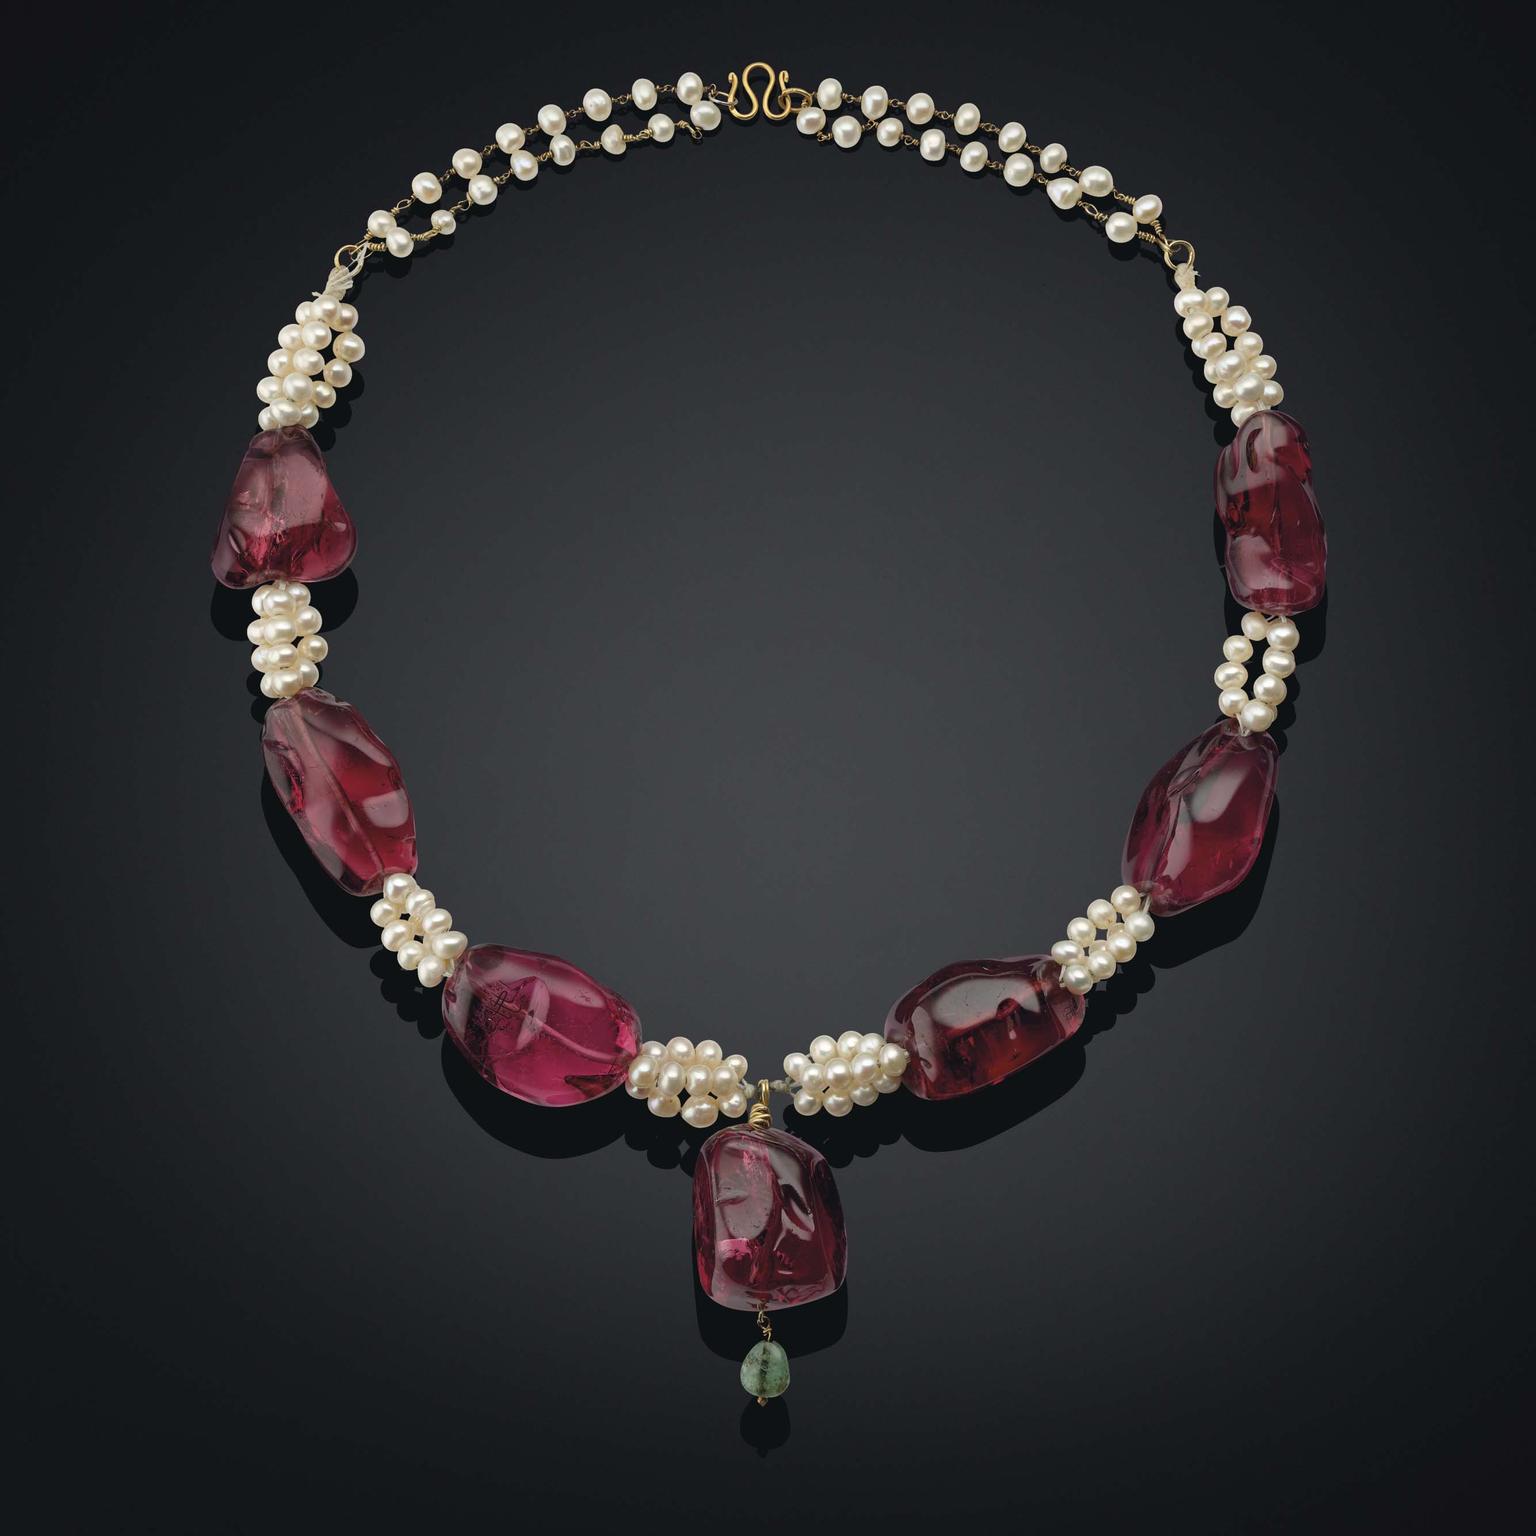 An Antique Imperial Spinel, Pearl and Emerald Necklace